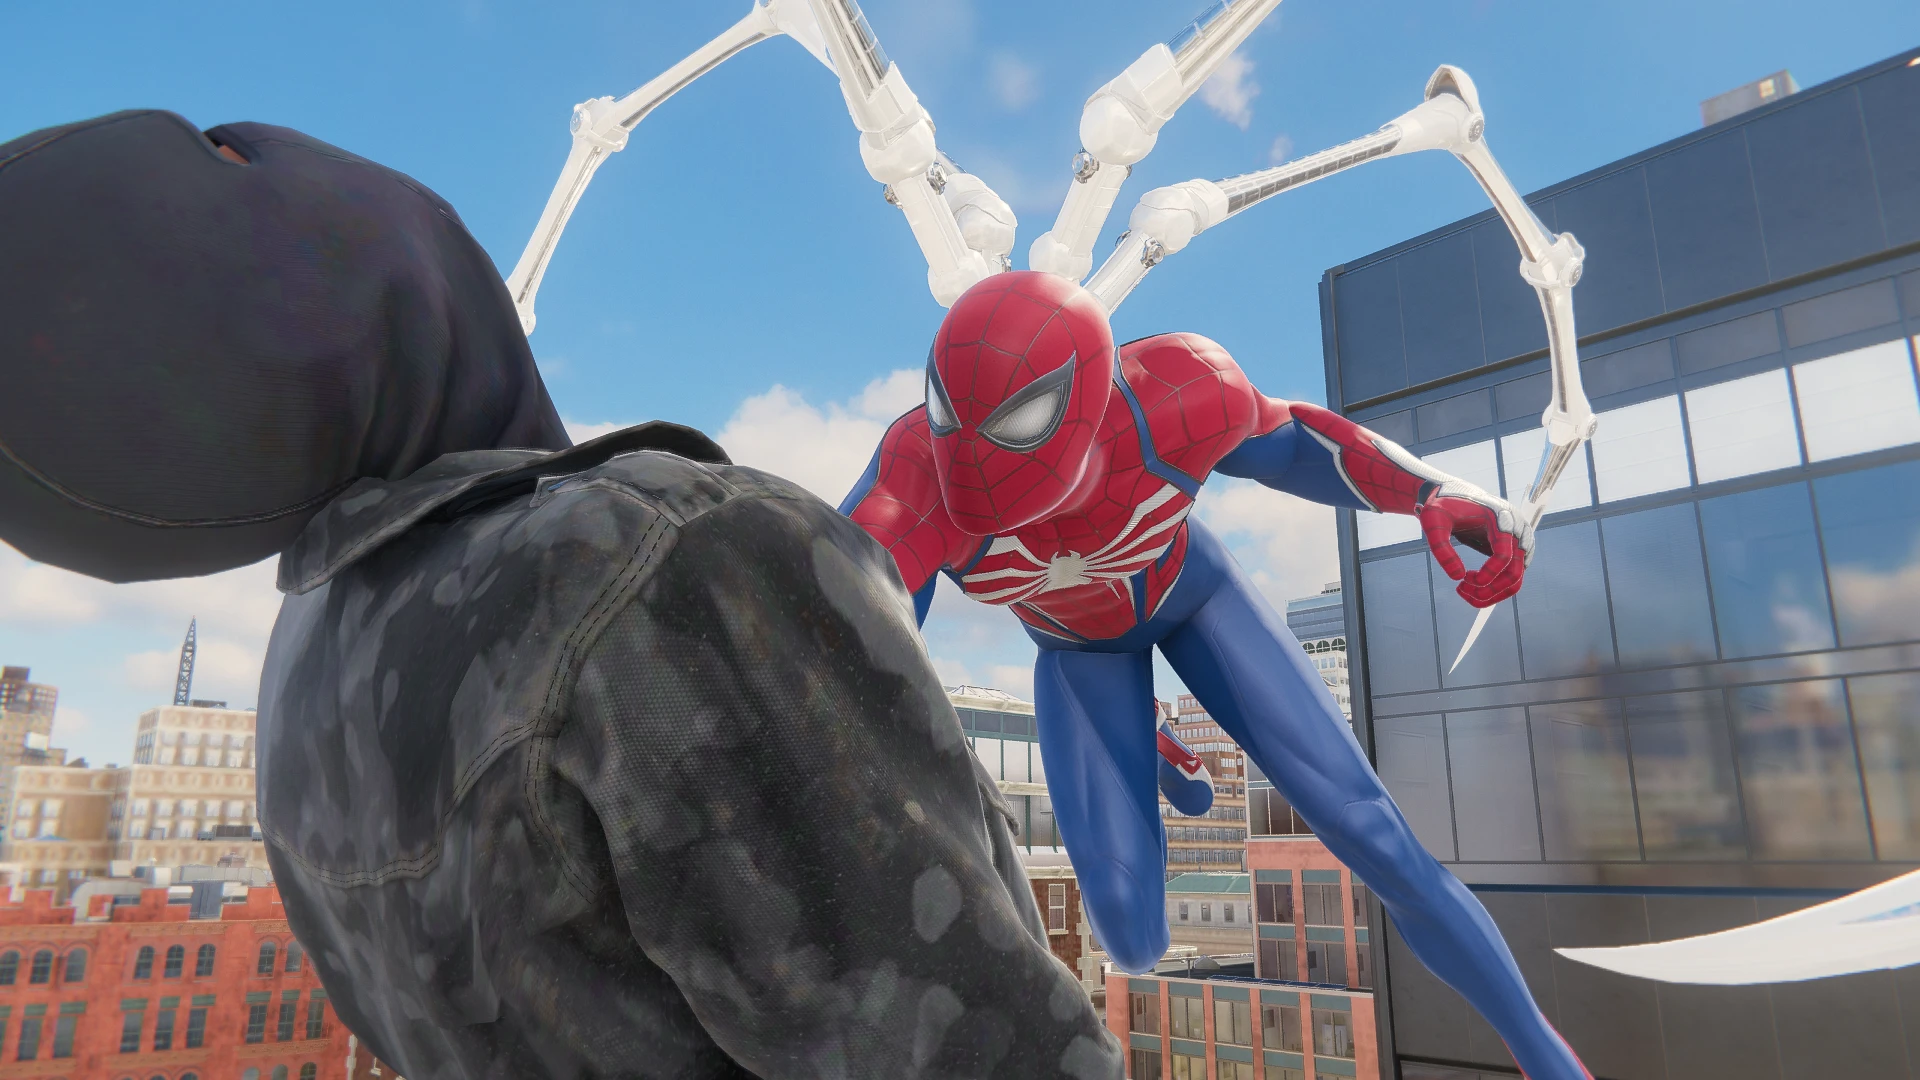 The best advanced II suit at Marvel's Spider-Man Remastered Nexus - Mods  and community